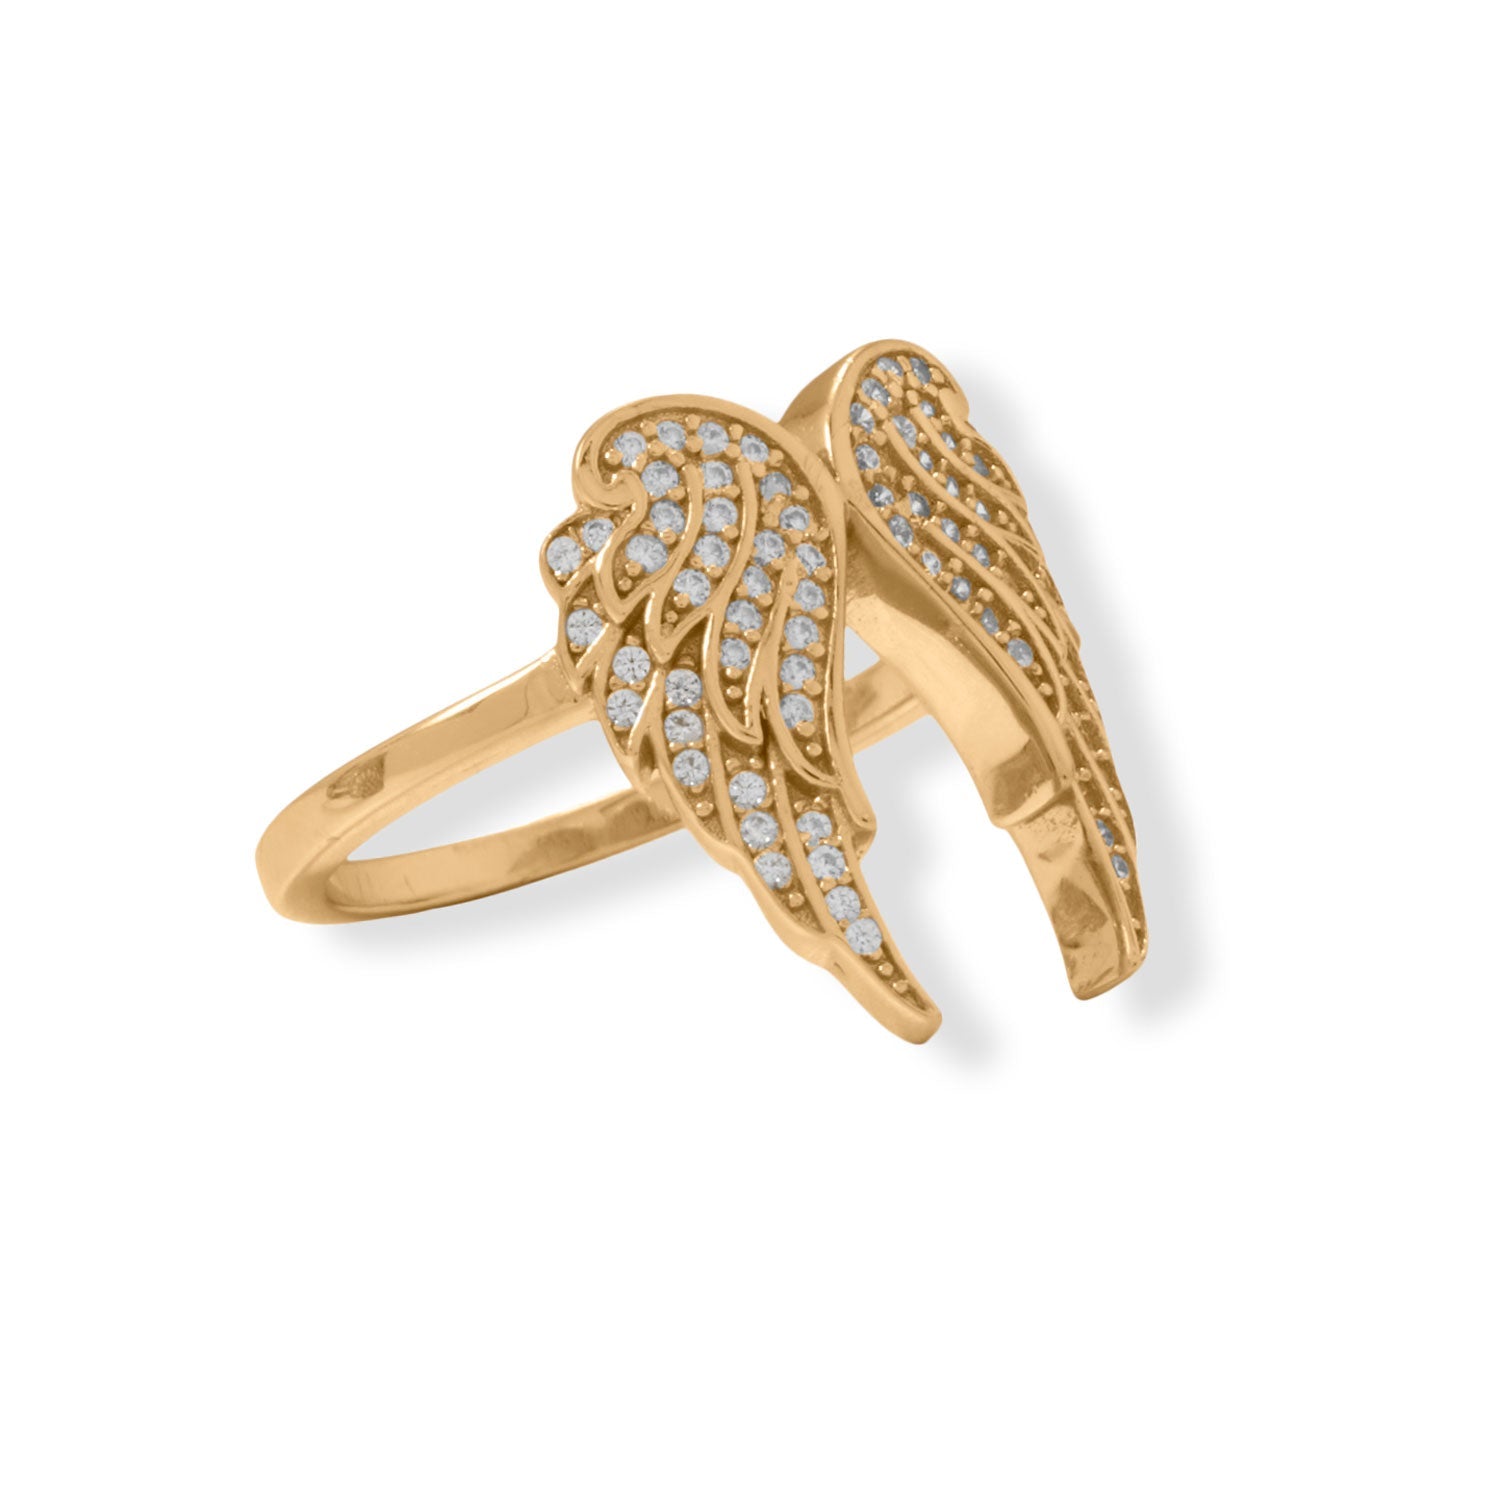 16 Karat Gold Plated CZ Angel Wings Ring